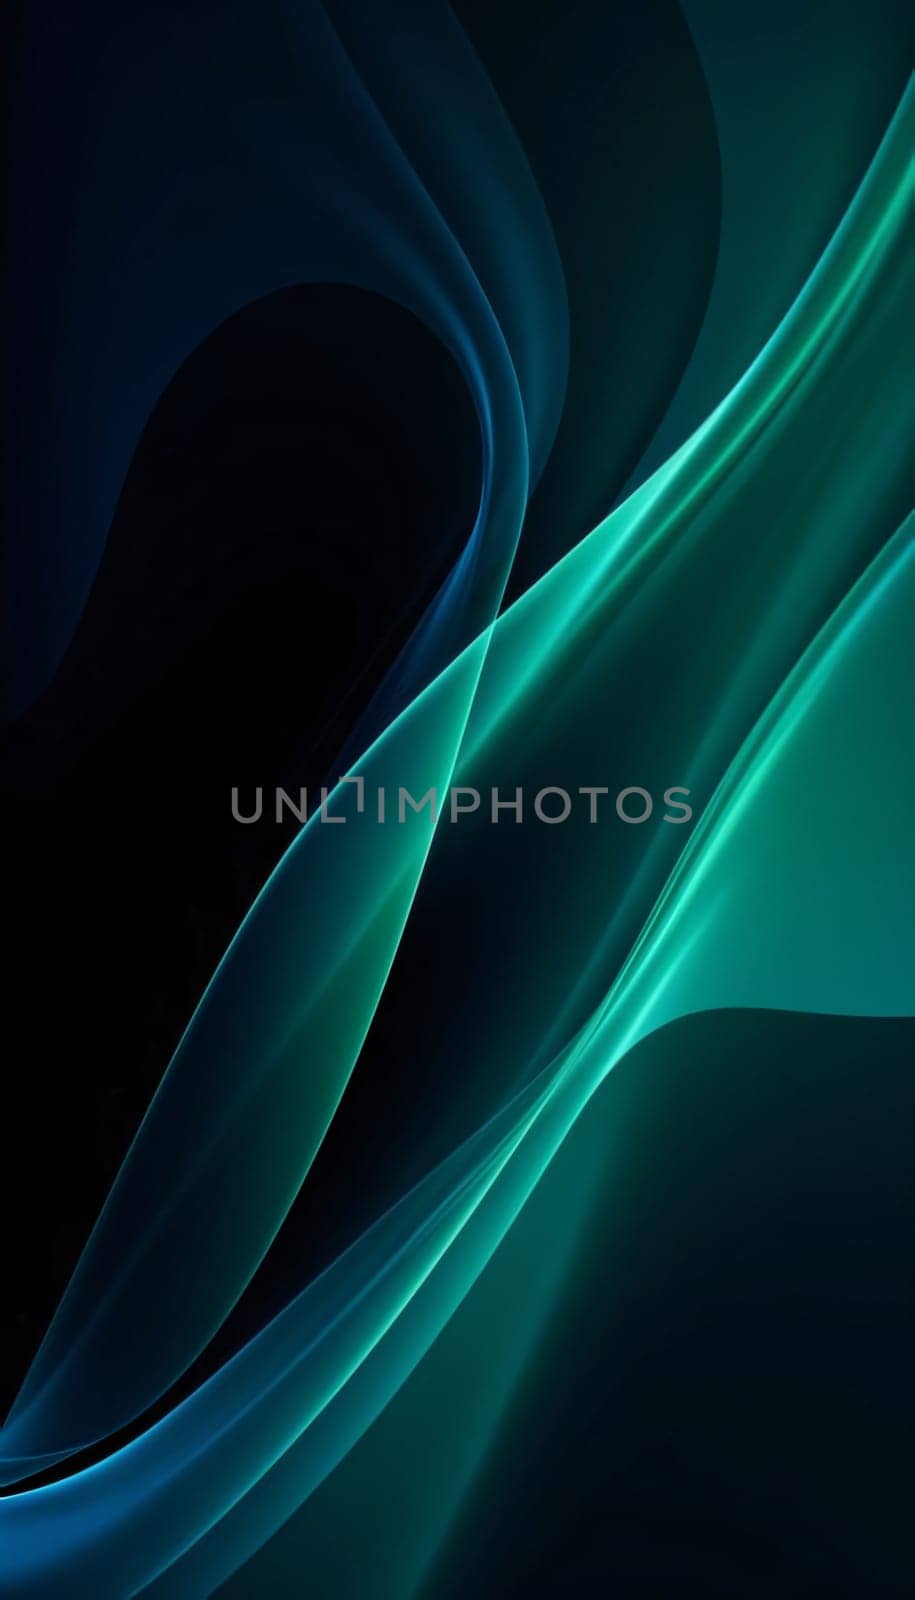 Abstract background design: abstract background with smooth lines in green and blue colors, illustration